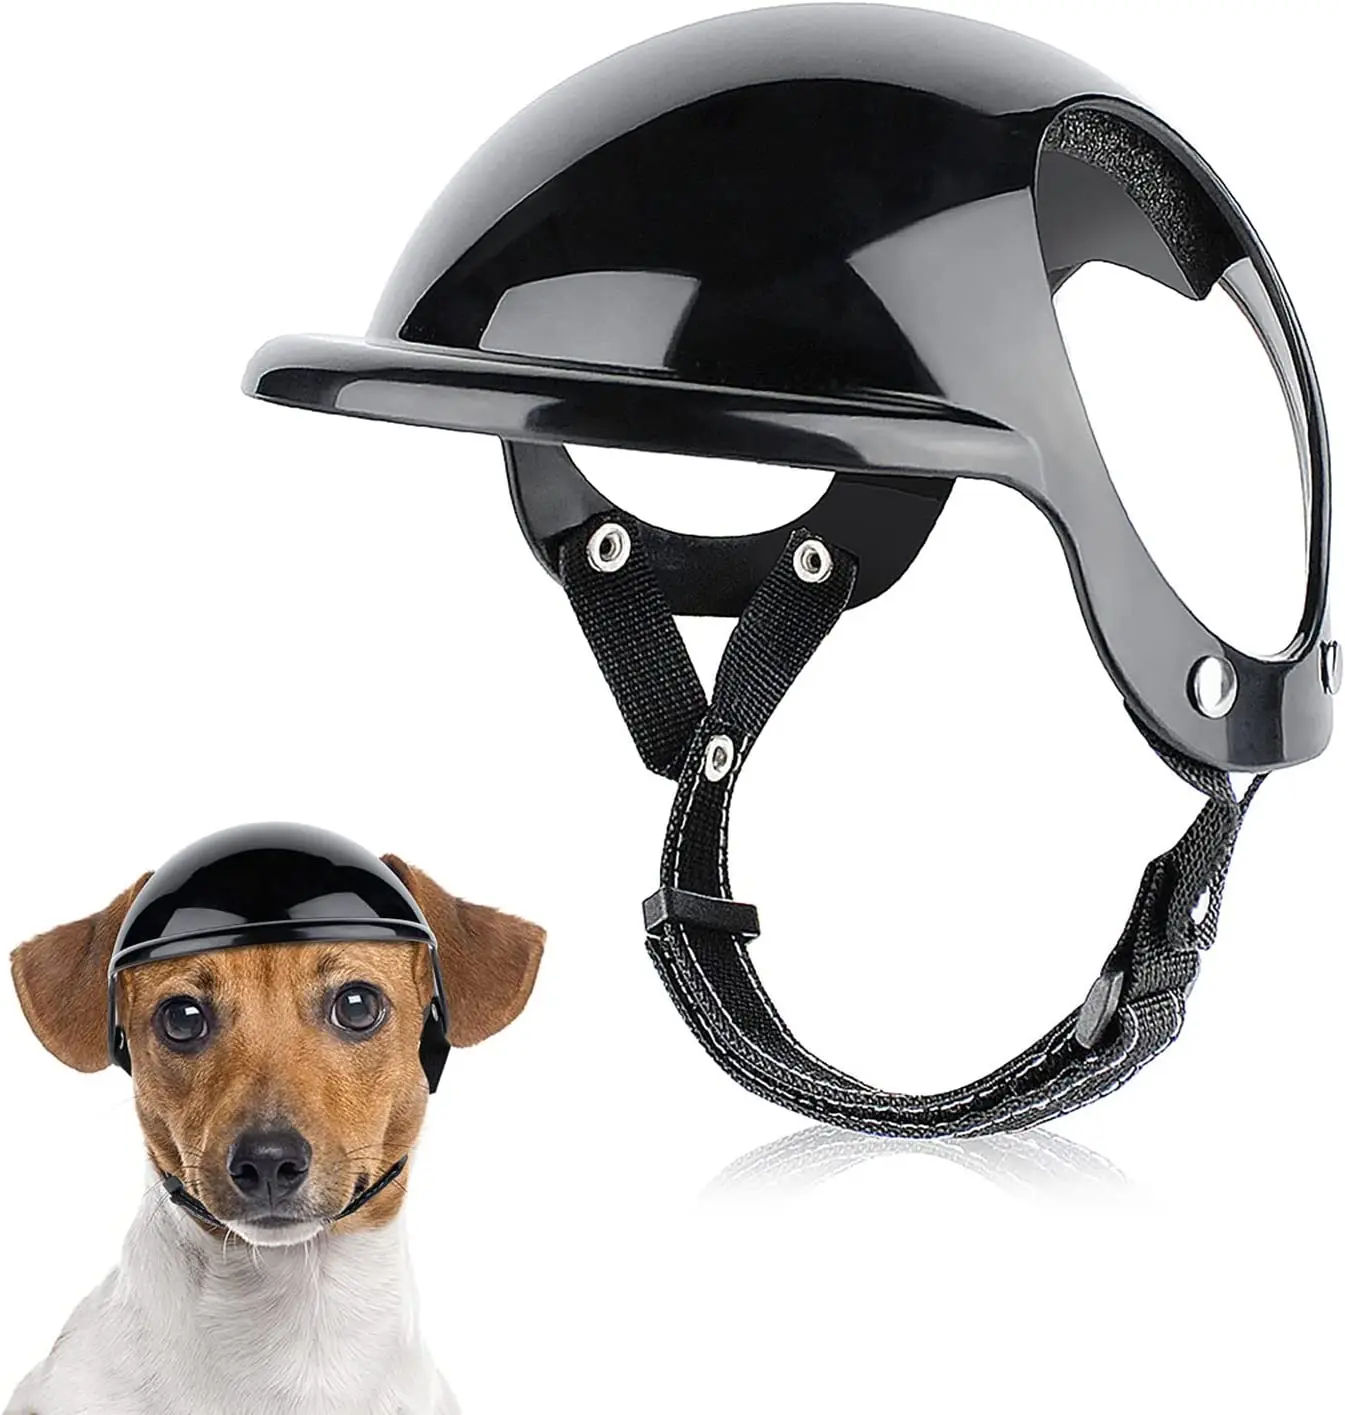 ATUBAN Small Pet Dog Helmet with Ear Hole Motorcycle Dog Helmet Multi-Sport Dog Hard Hat Outdoor Bike Doggy Cap for Dogs and Cat